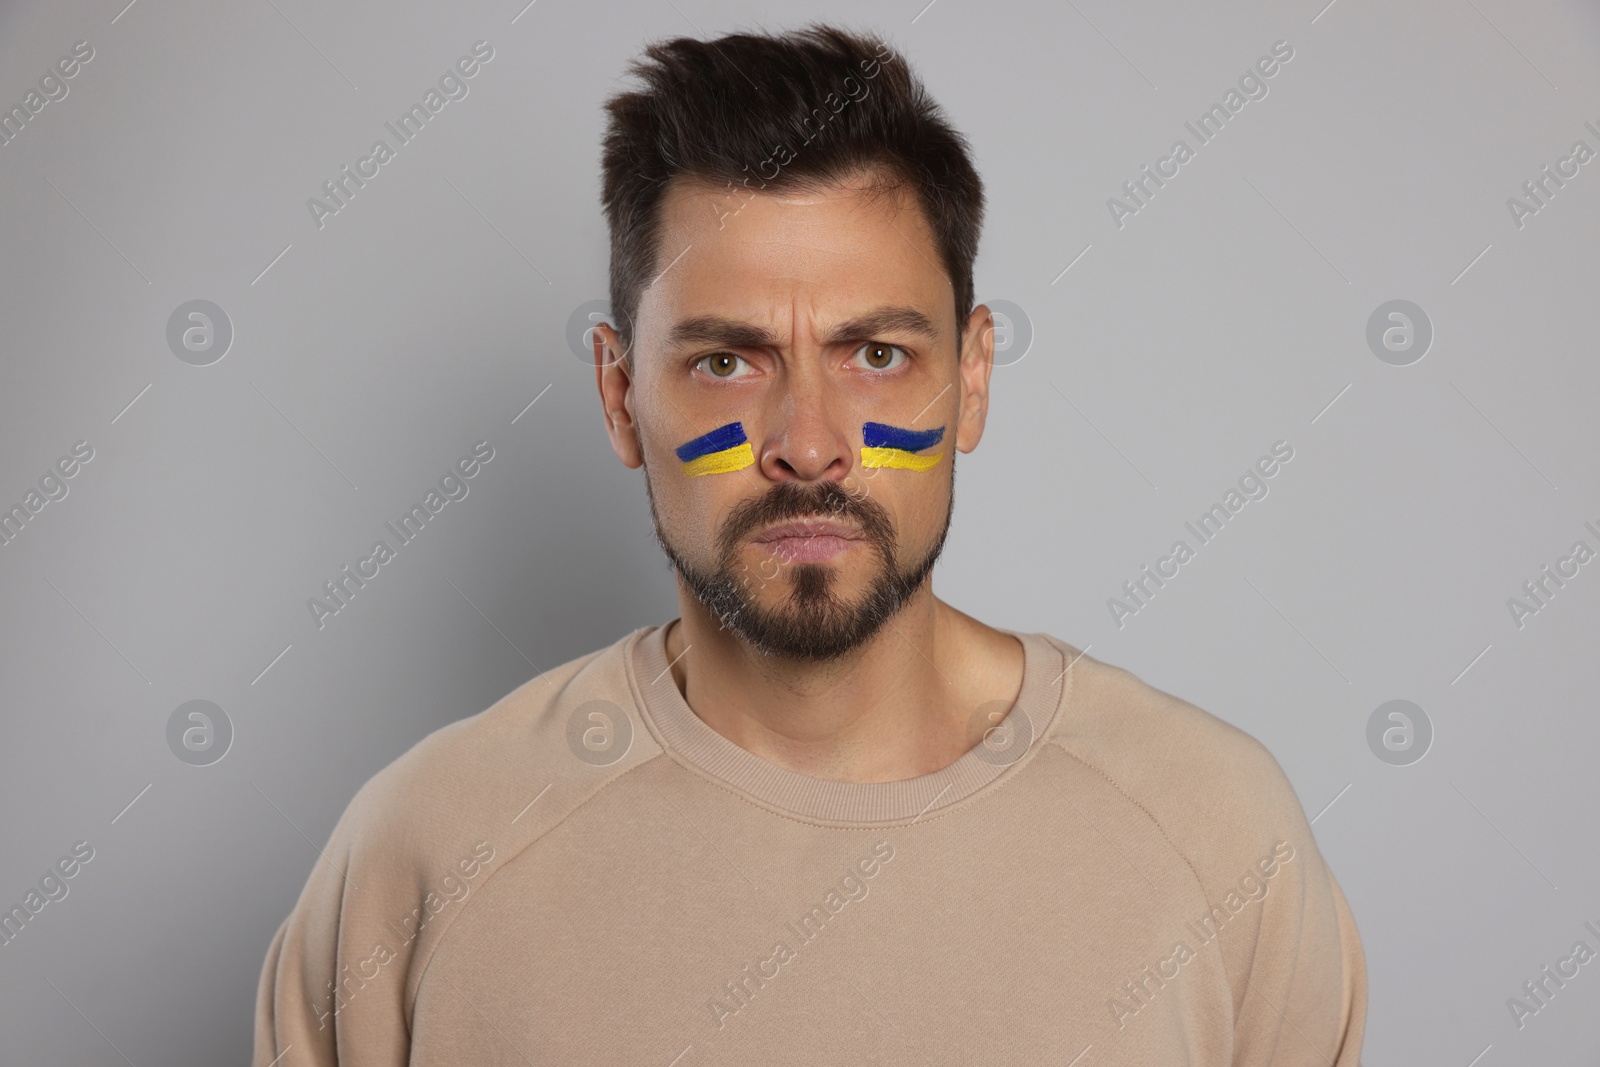 Photo of Angry man with drawings of Ukrainian flag on face against light grey background